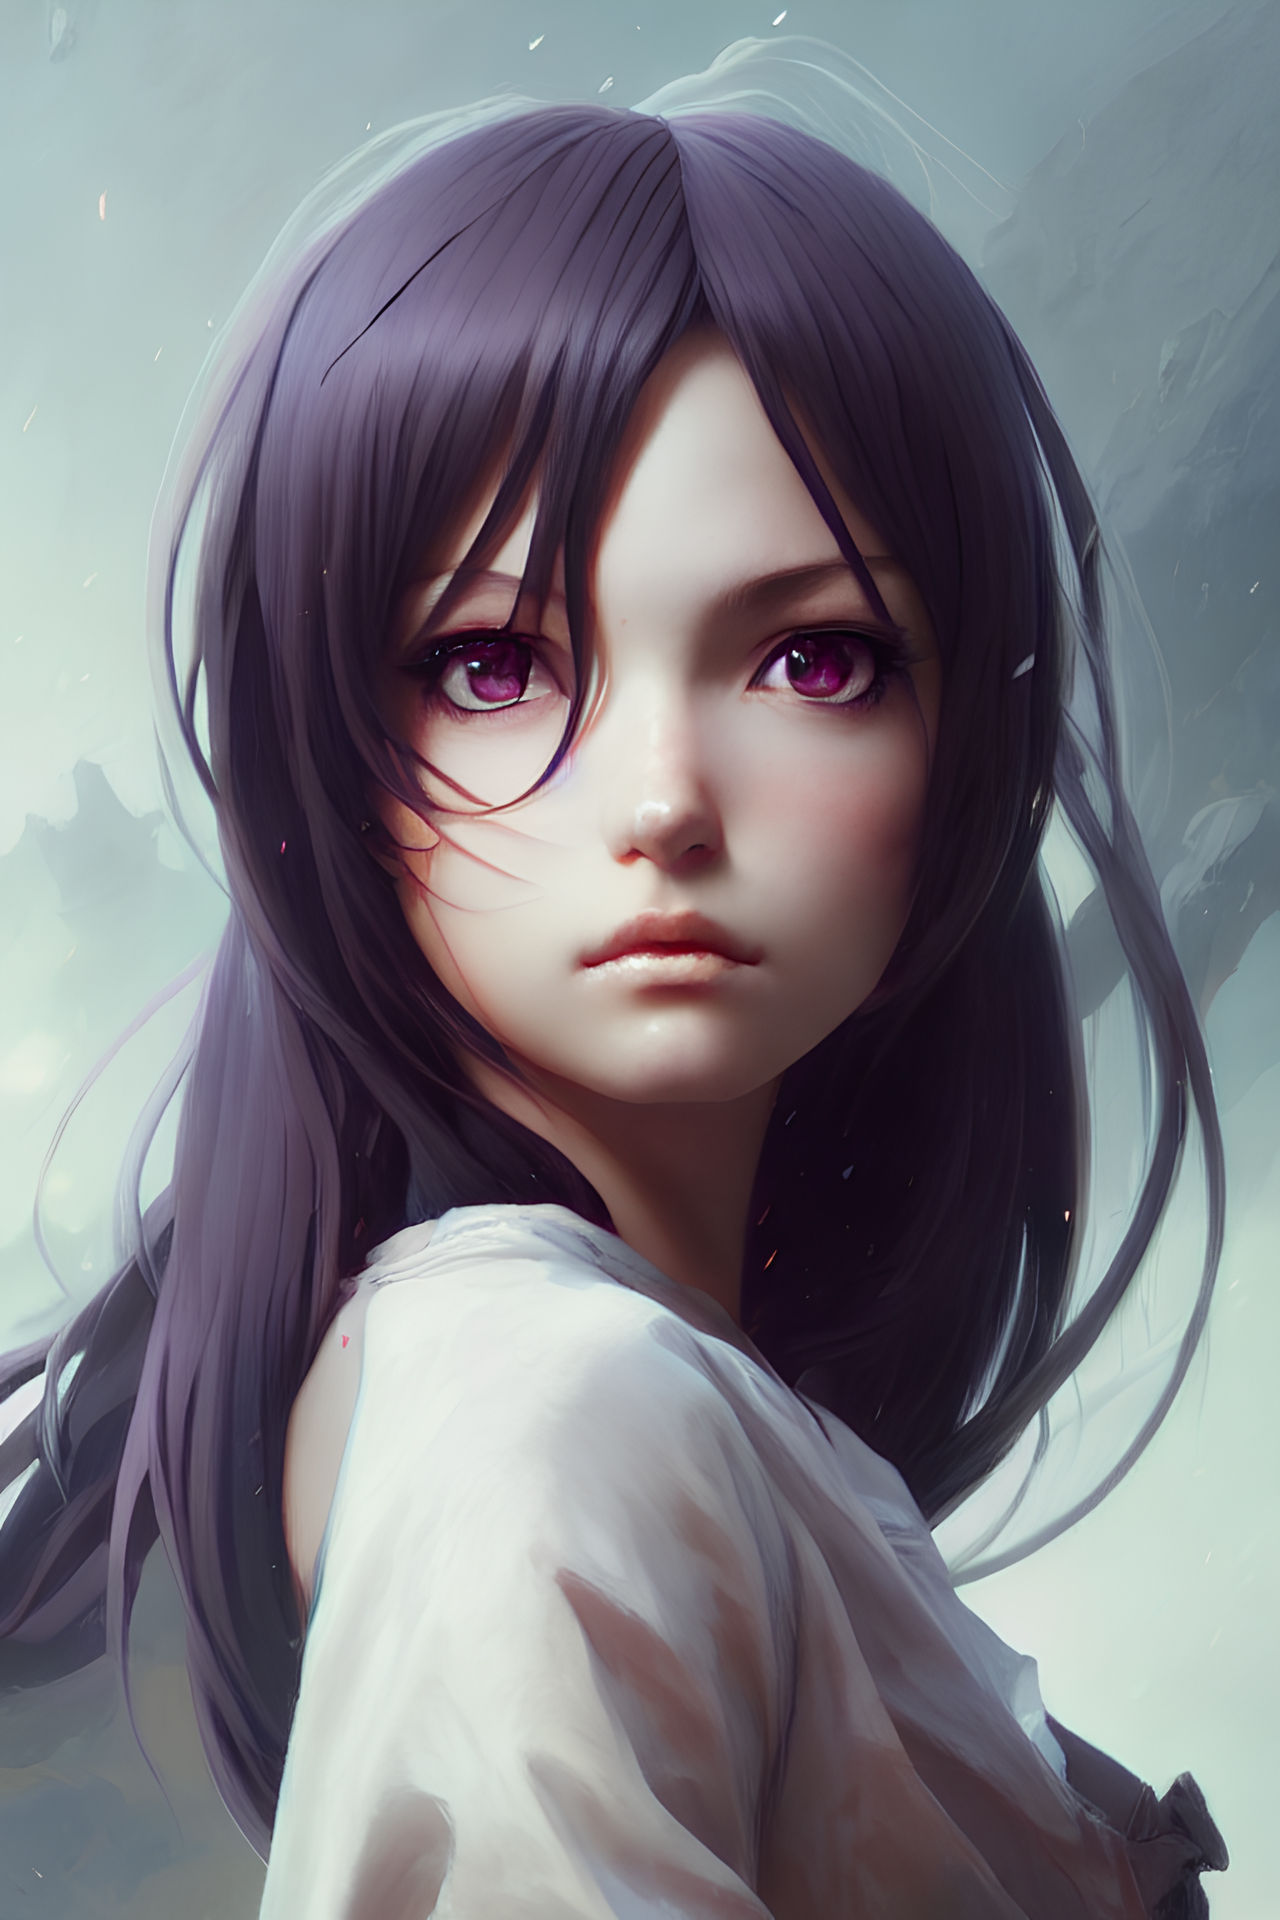 Realistic beautiful anime girl with purple hair#34 by tobithenoob on  DeviantArt